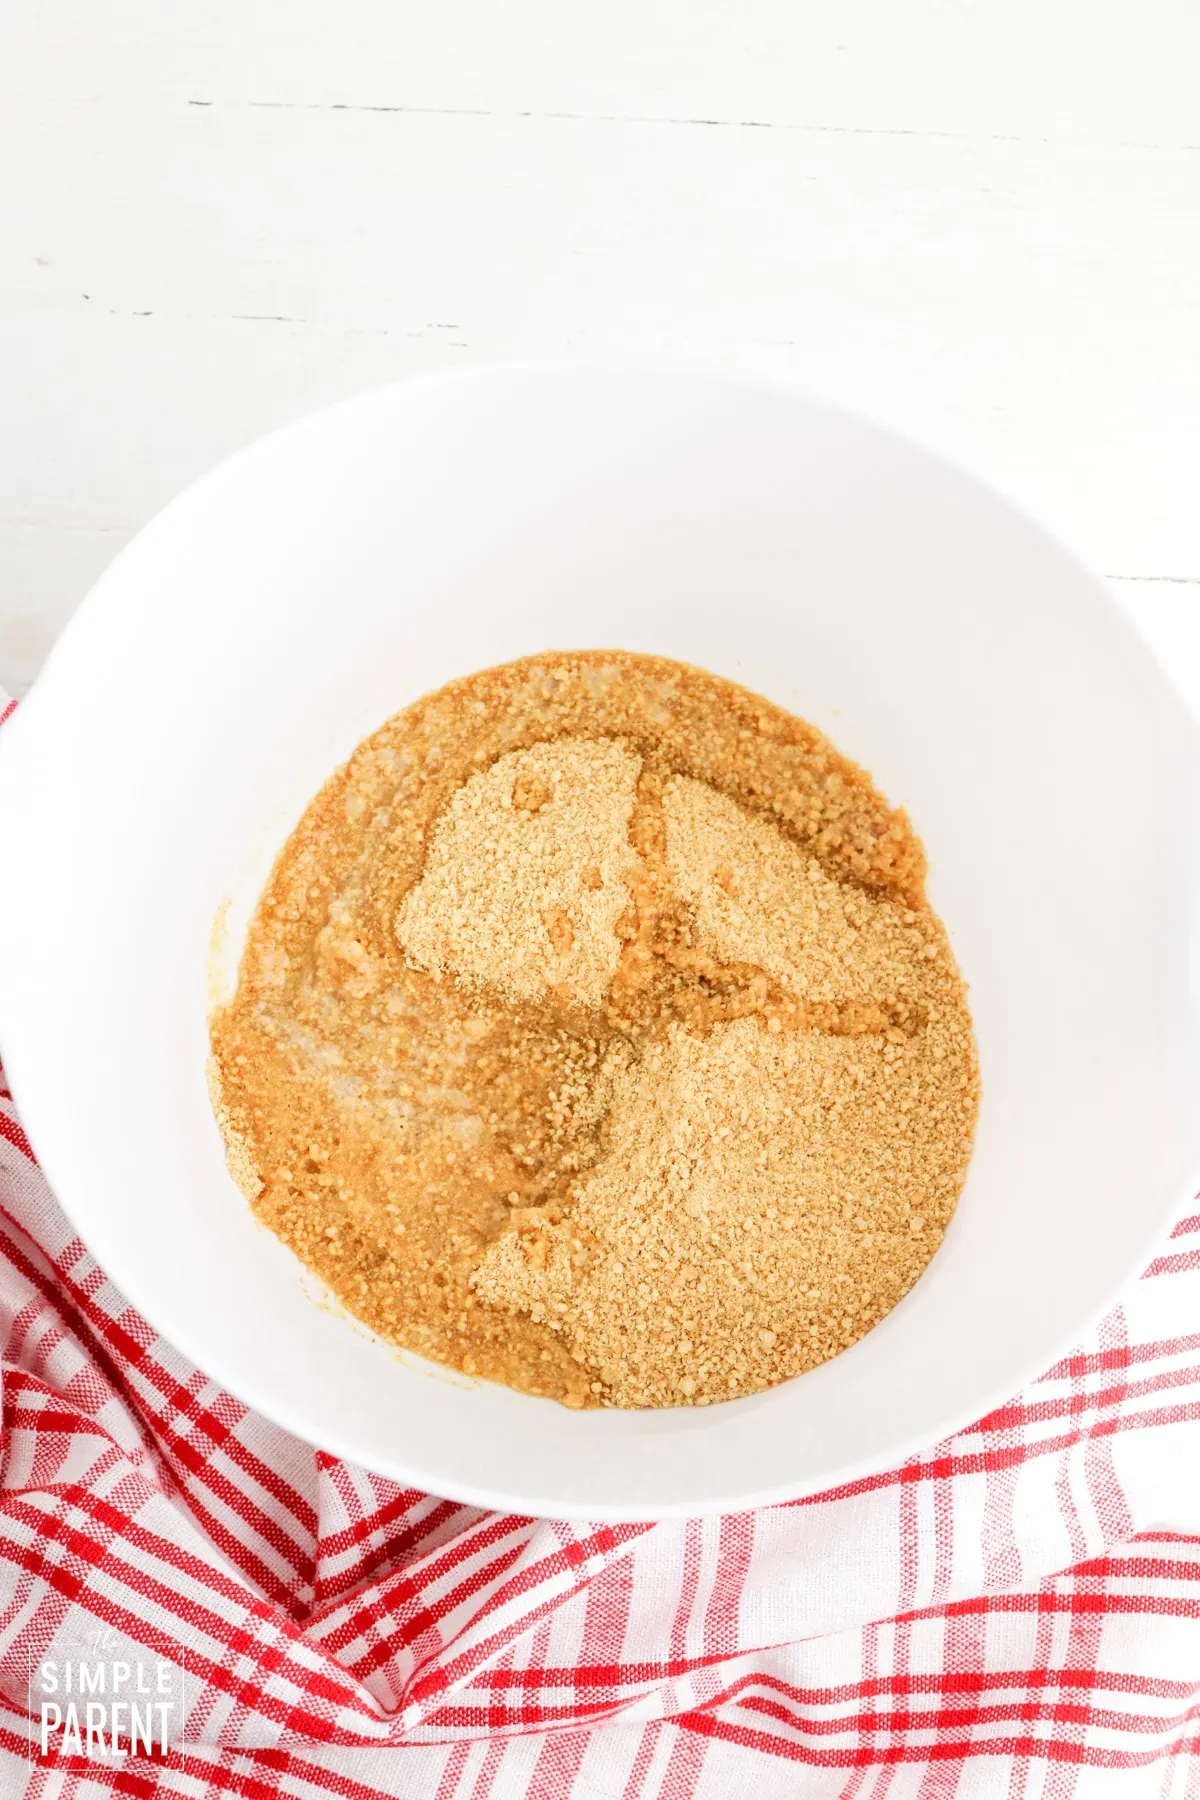 Graham cracker crumbs and melted butter in mixing bowl